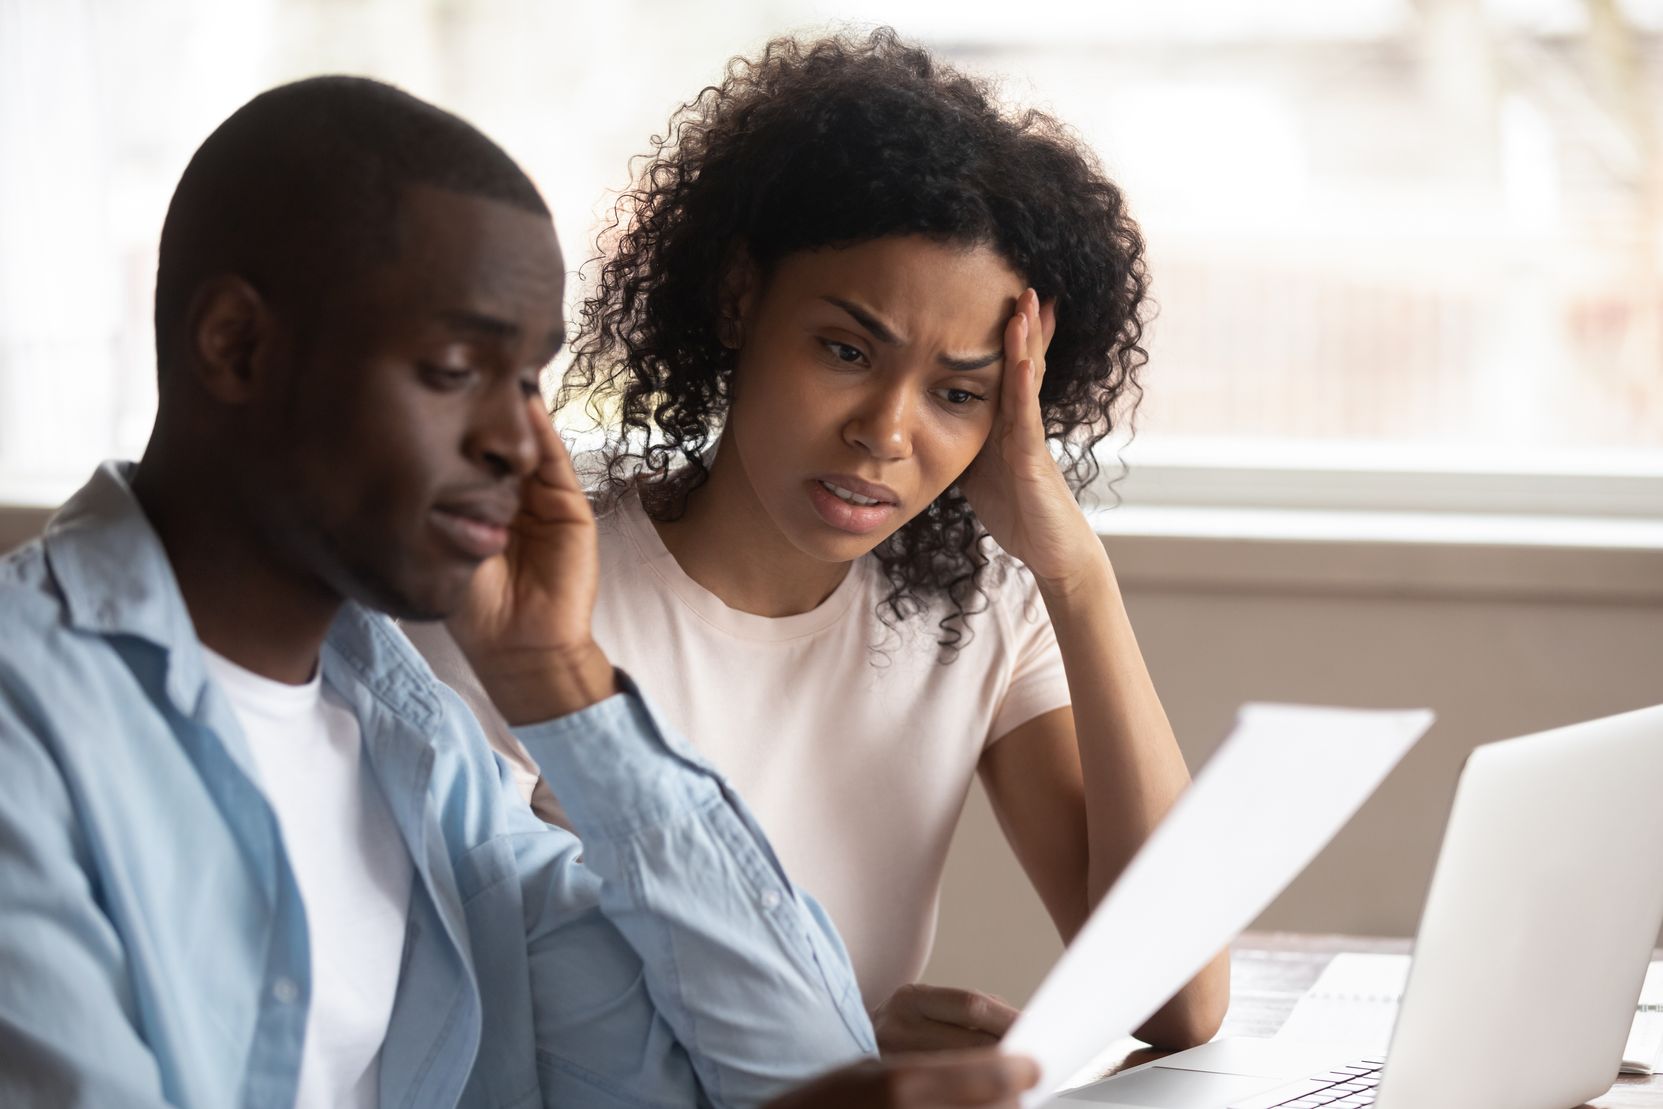 African American couple assessing their finances together with distressed faces.